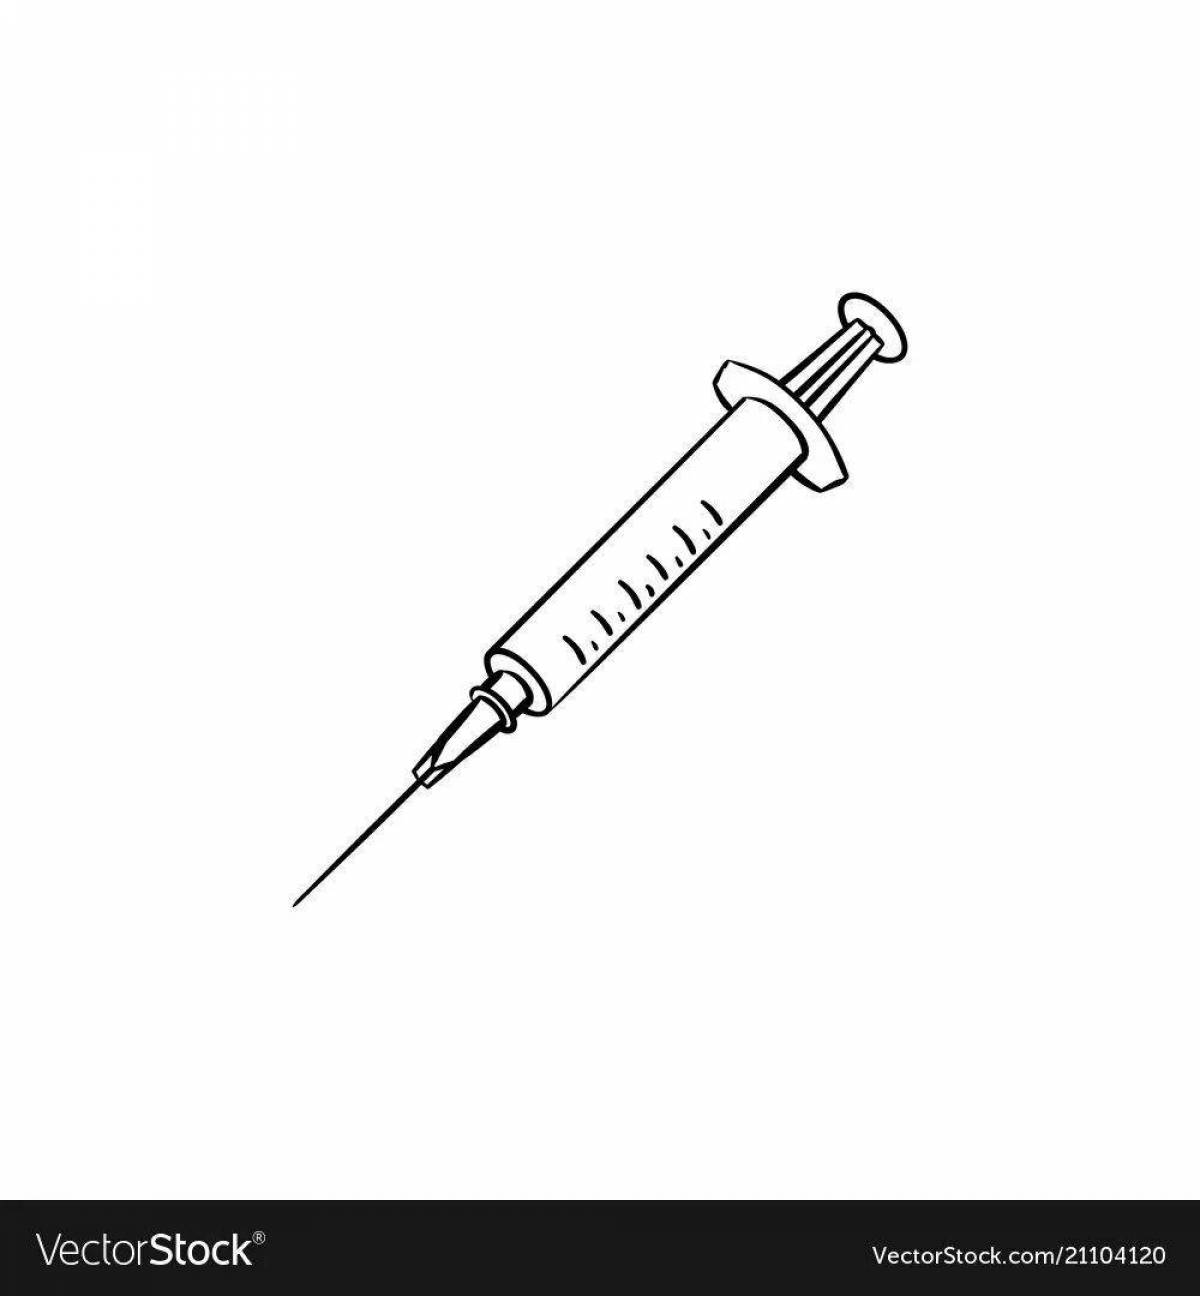 Coloring page adorable syringe with needle